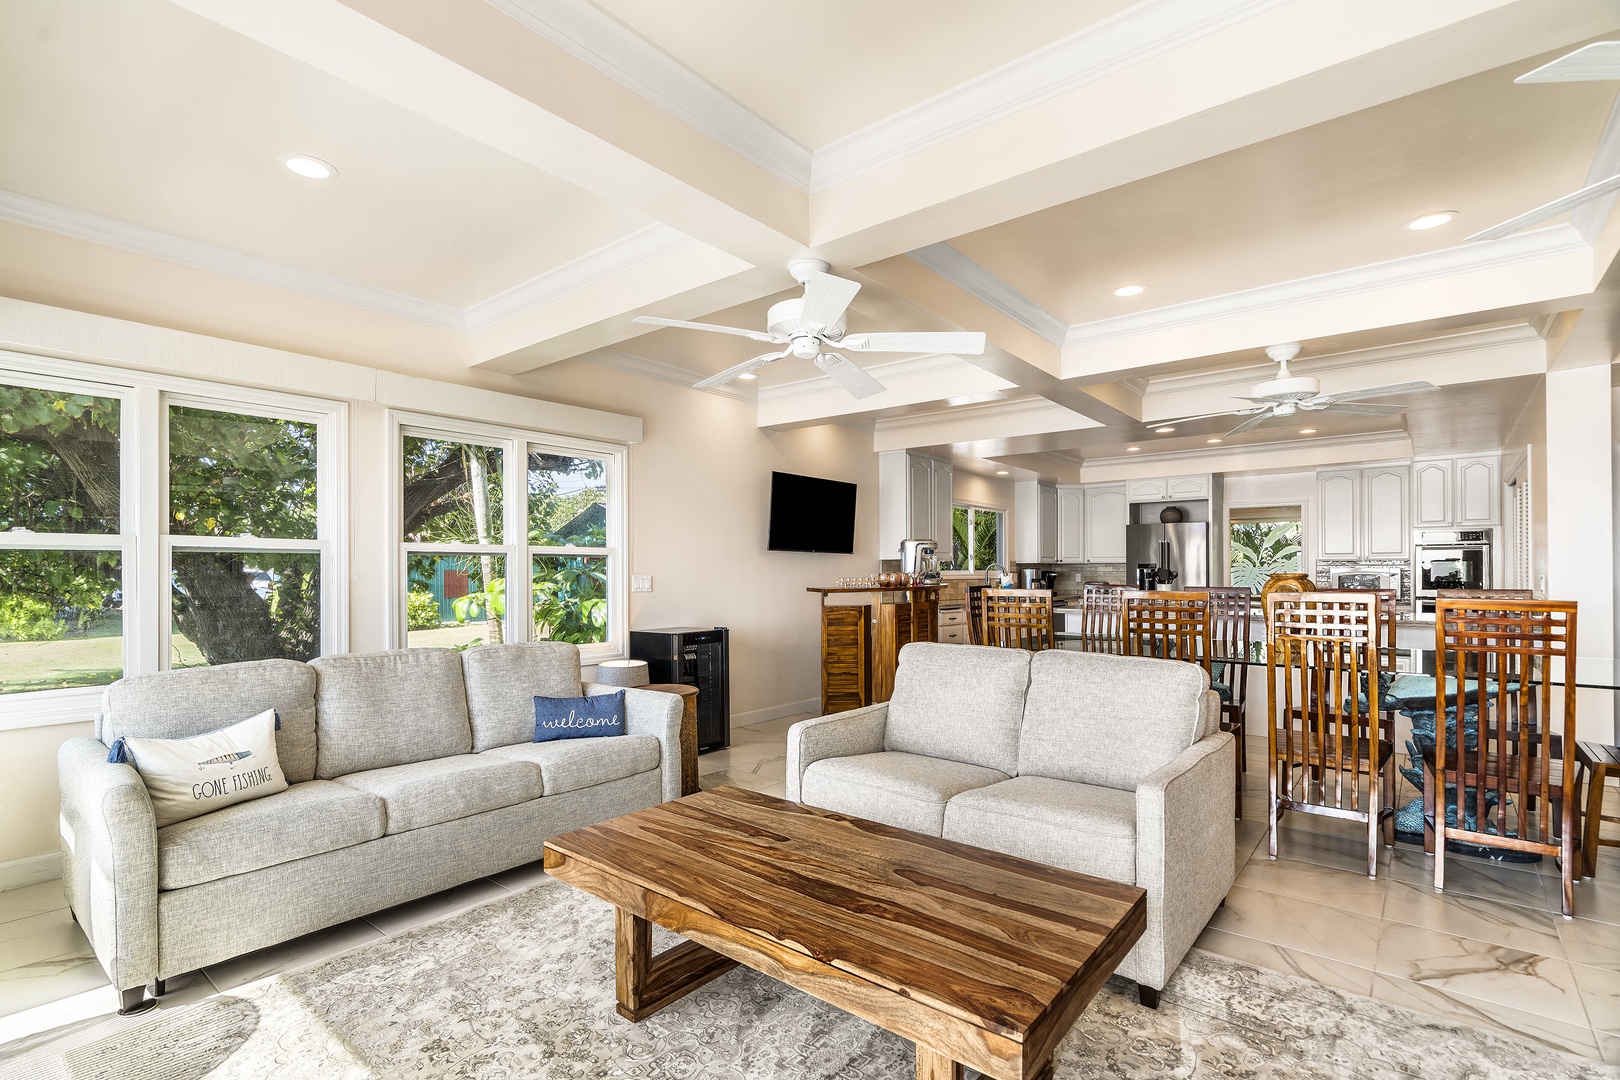 Kailua Kona Vacation Rentals, Dolphin Manor - This private, gated plantation-style property oozes old world charm, but has all the modern conveniences that you crave